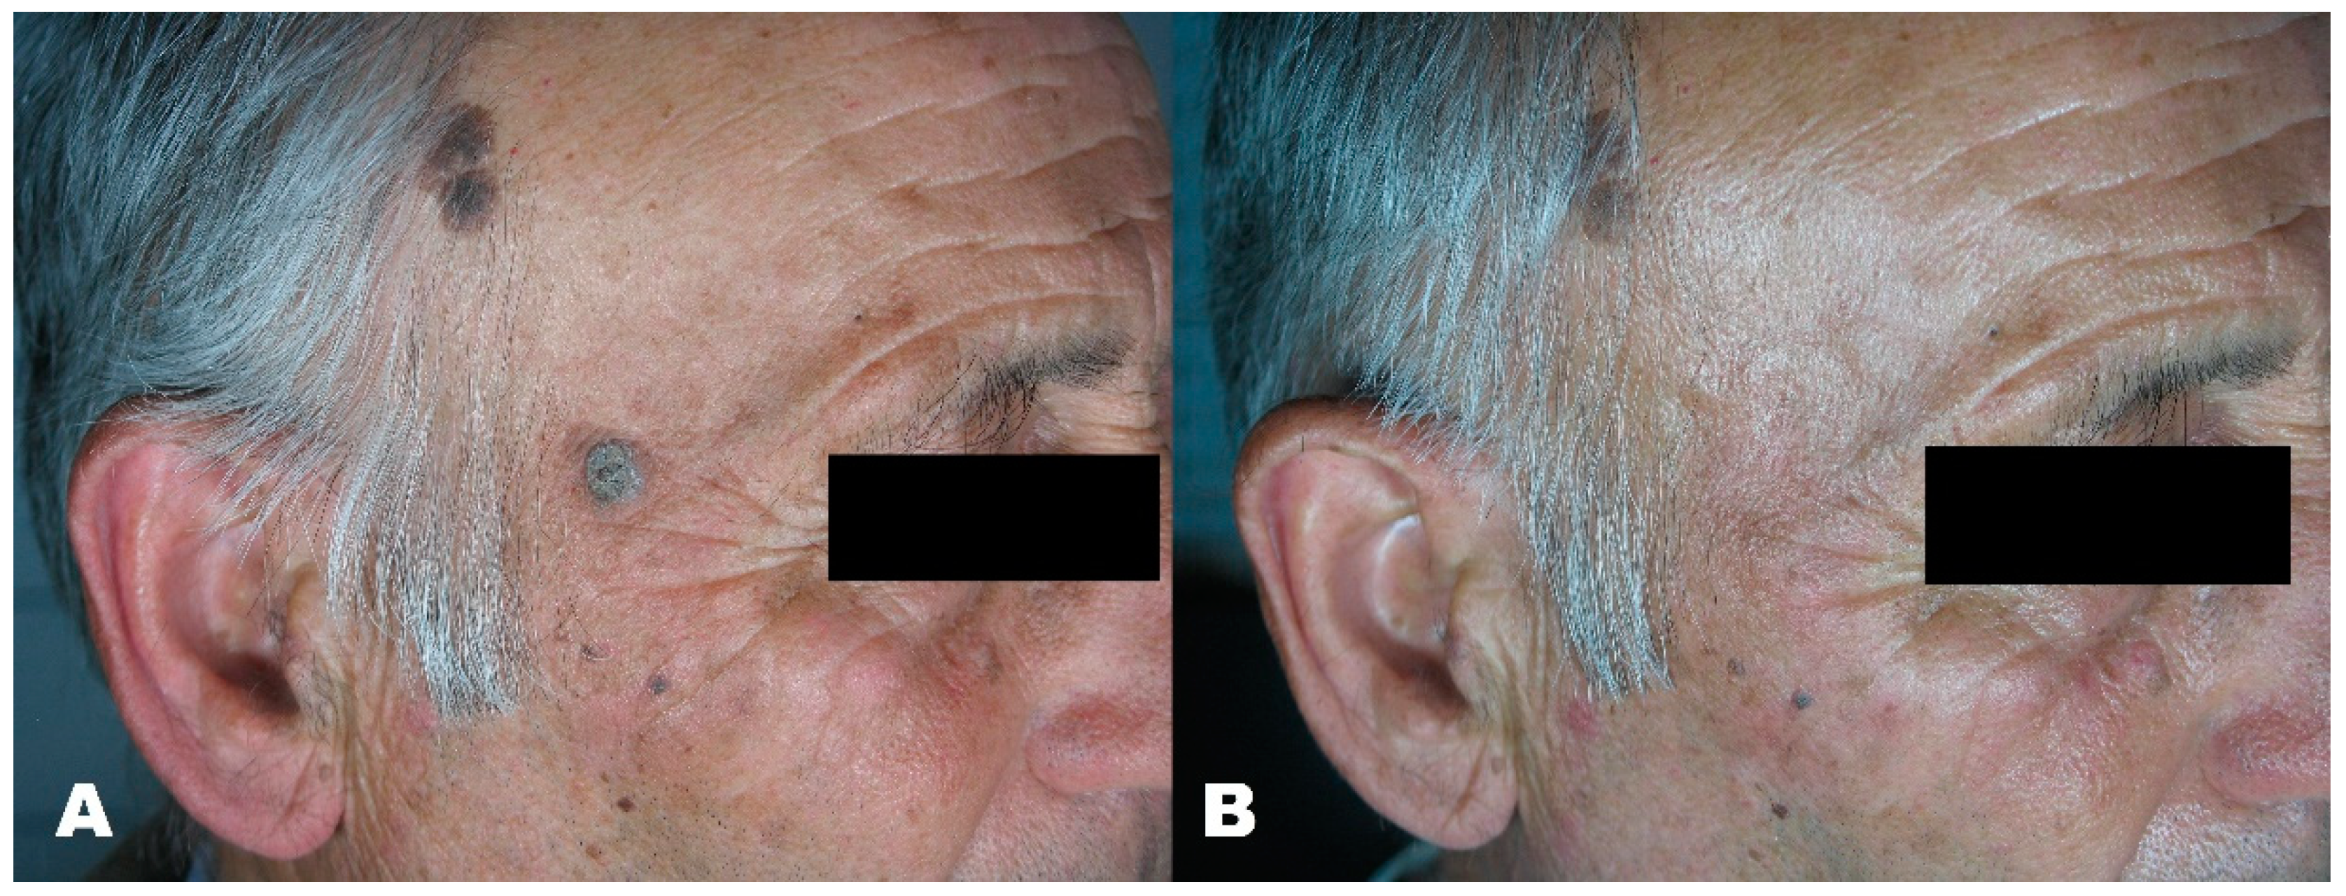 Medicines | Free Full-Text | Erbium Laser for Skin Surgery: A Single-Center  Twenty-Five Years&rsquo; Experience